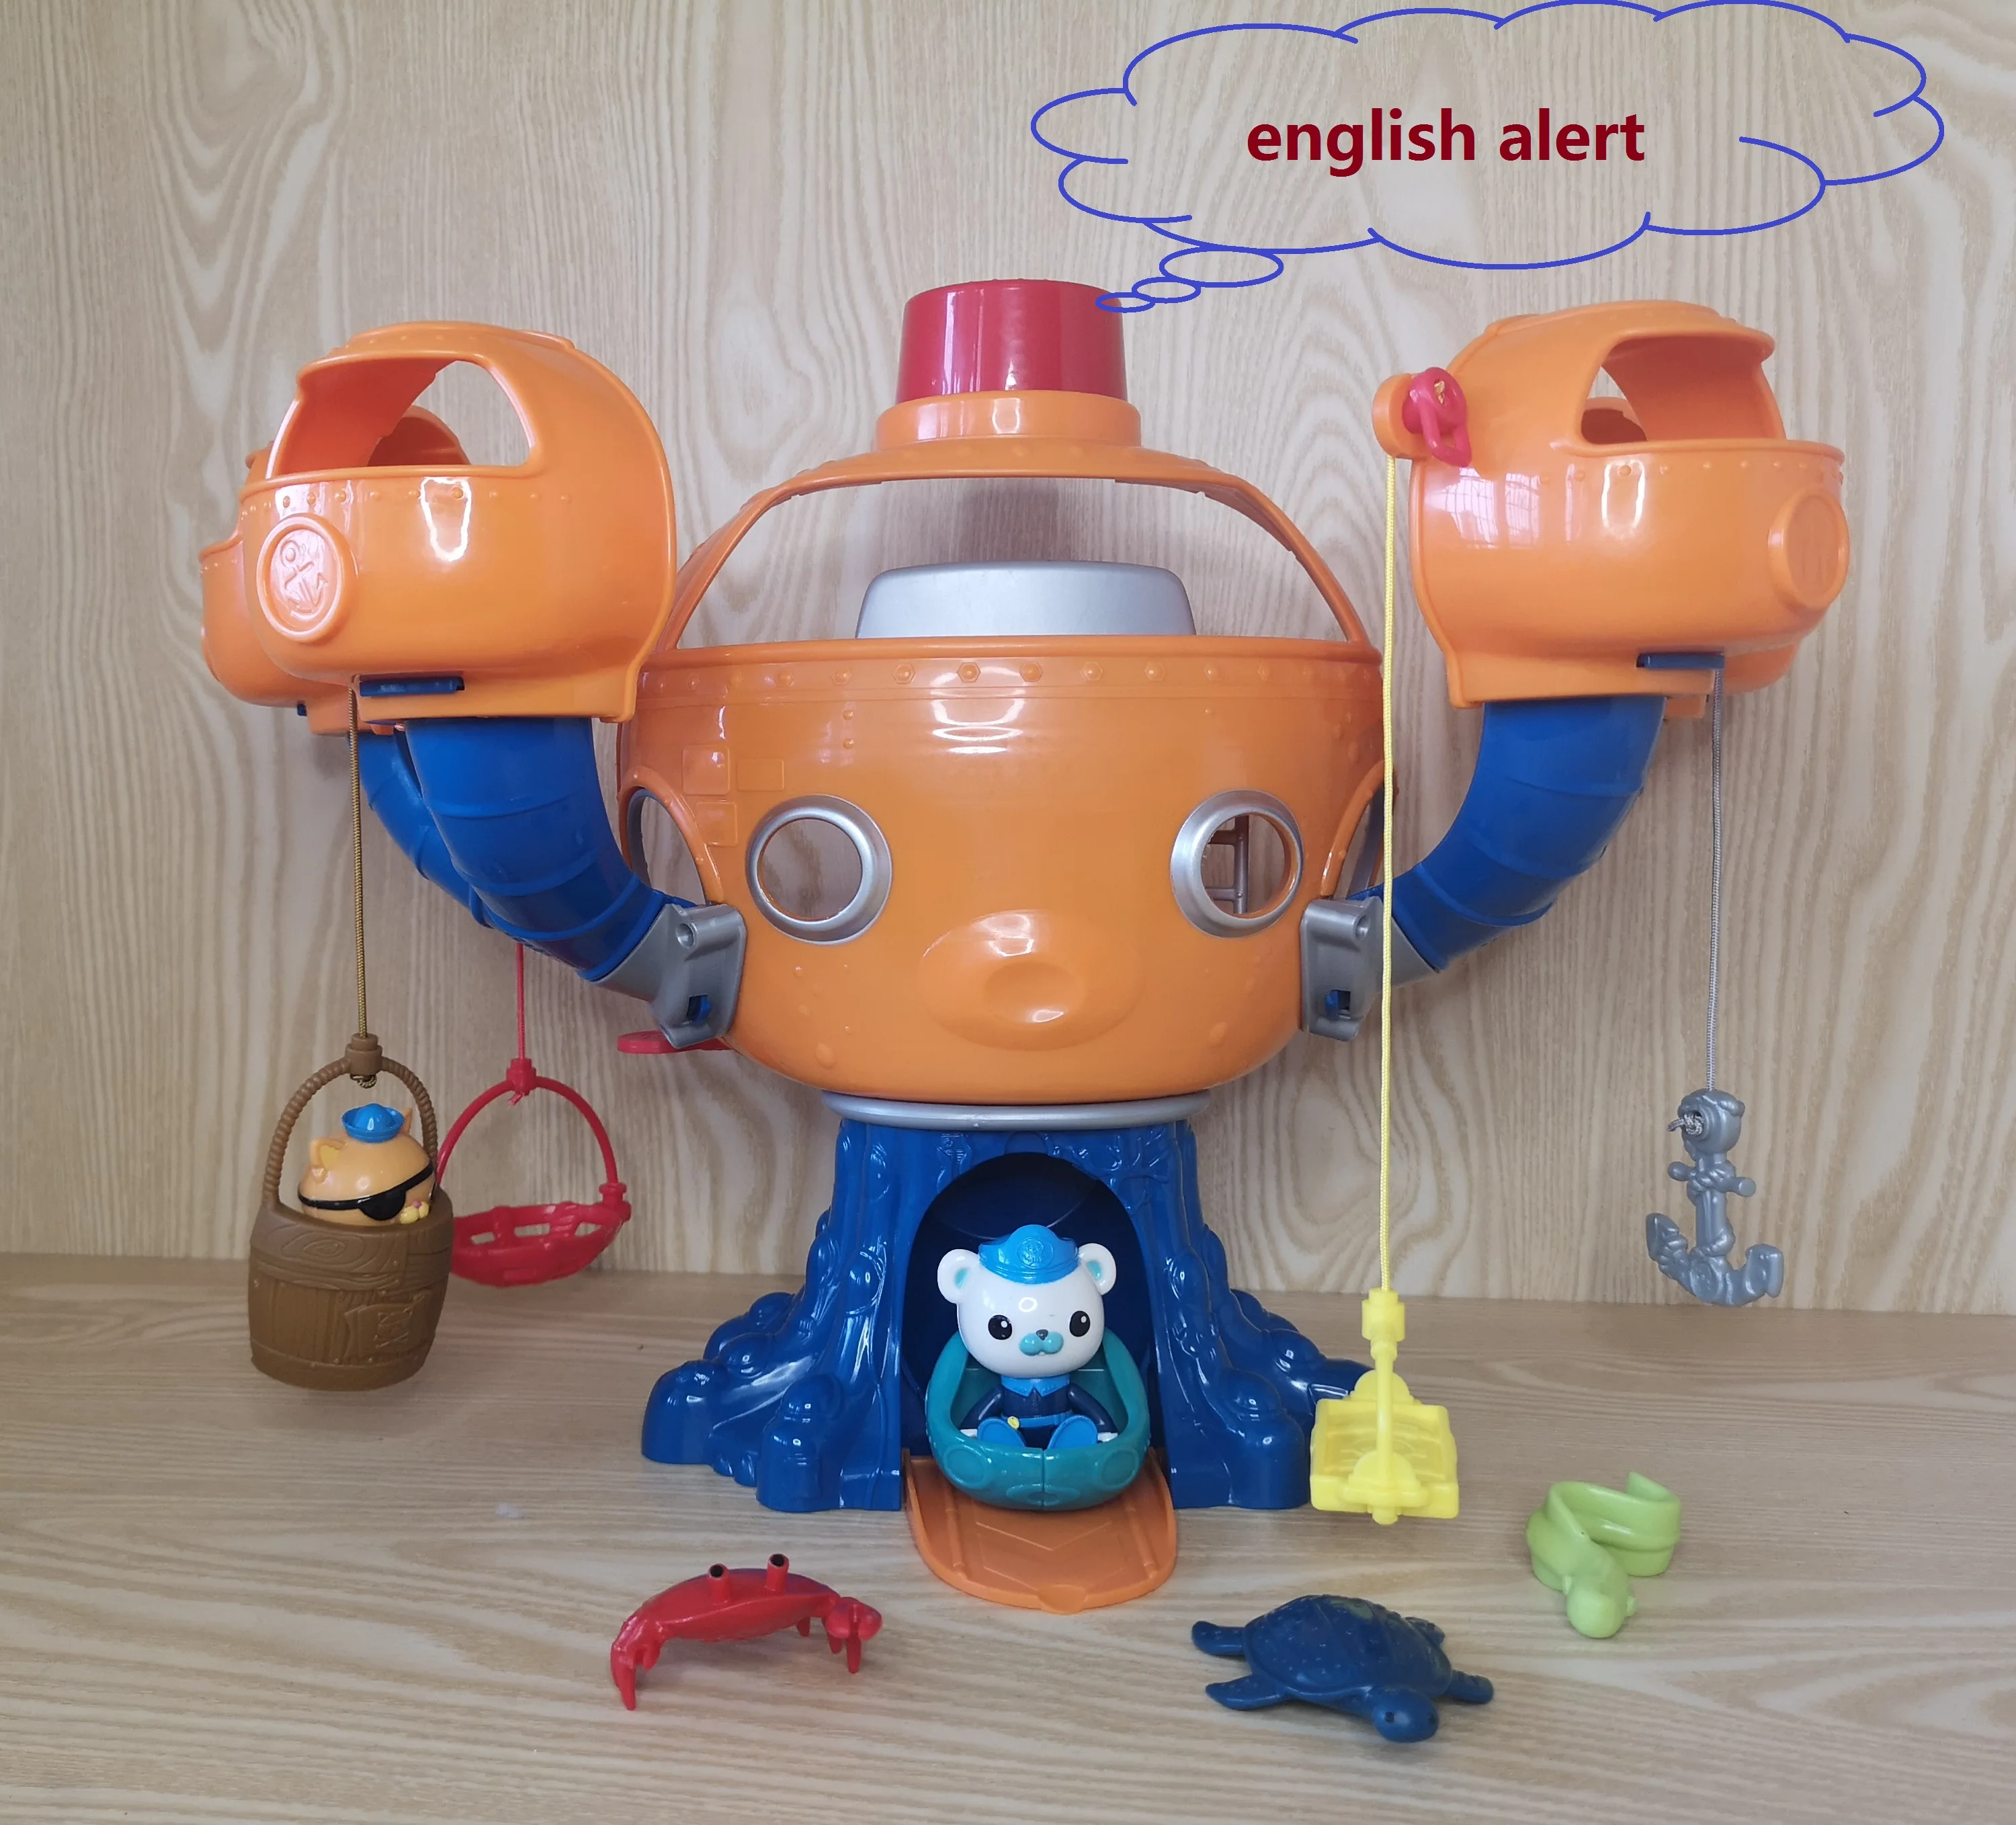 English Octo Alert Original Octonauts Toys Octopod Castle Without Box Action Figures Barnacles Kwazii Children's Toys Free Ship